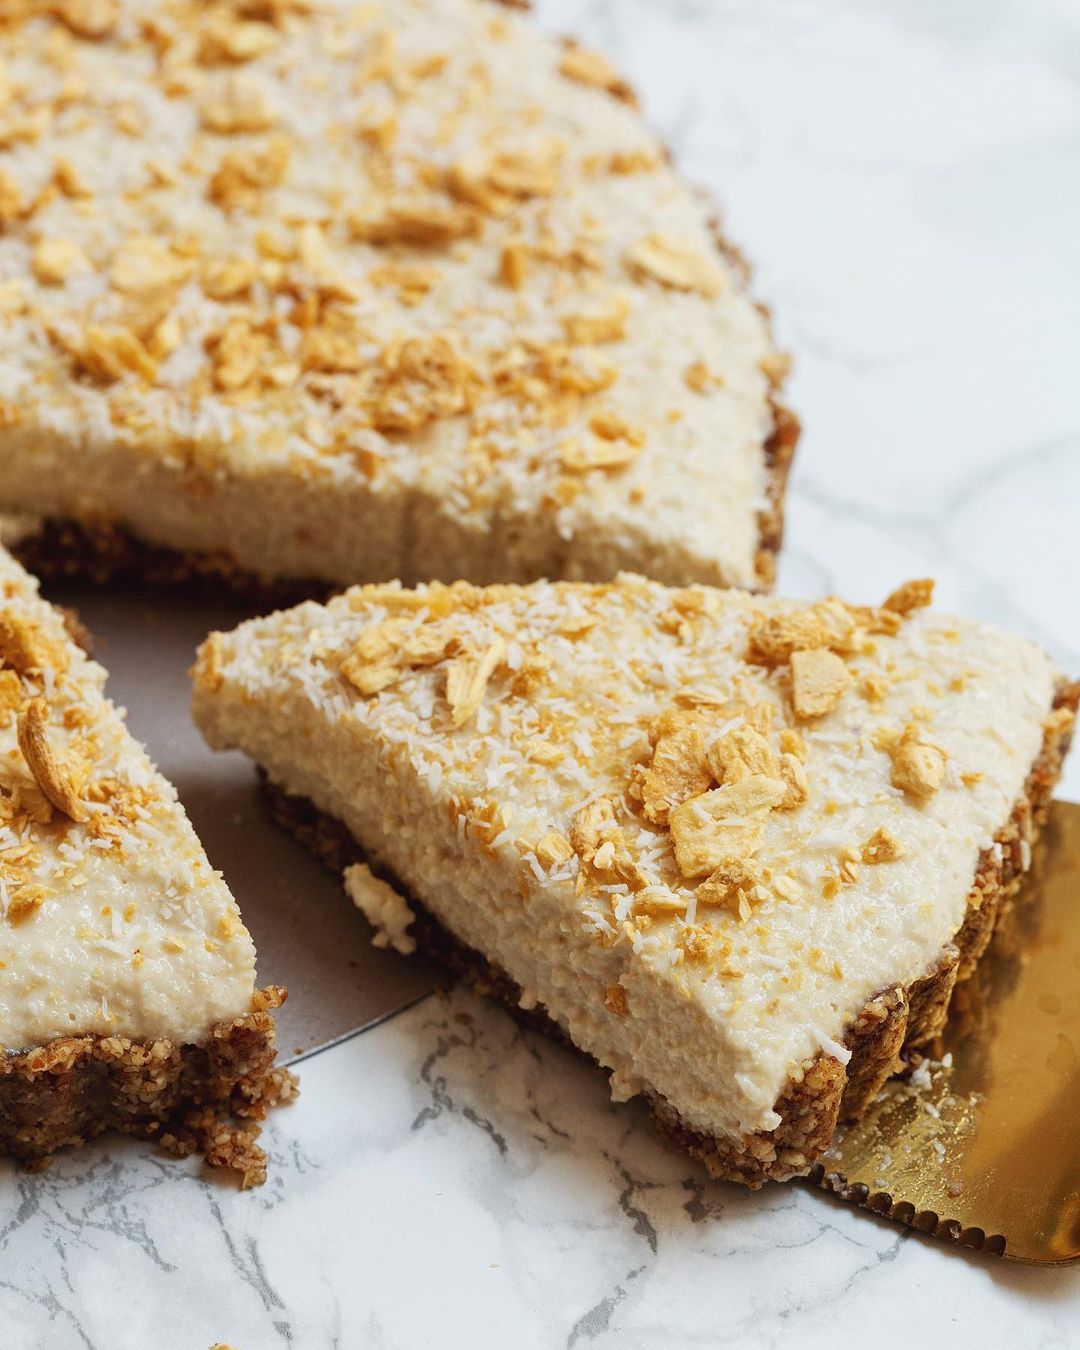 No Bake Vegan Cheesecake with Pineapple Coconut Topping